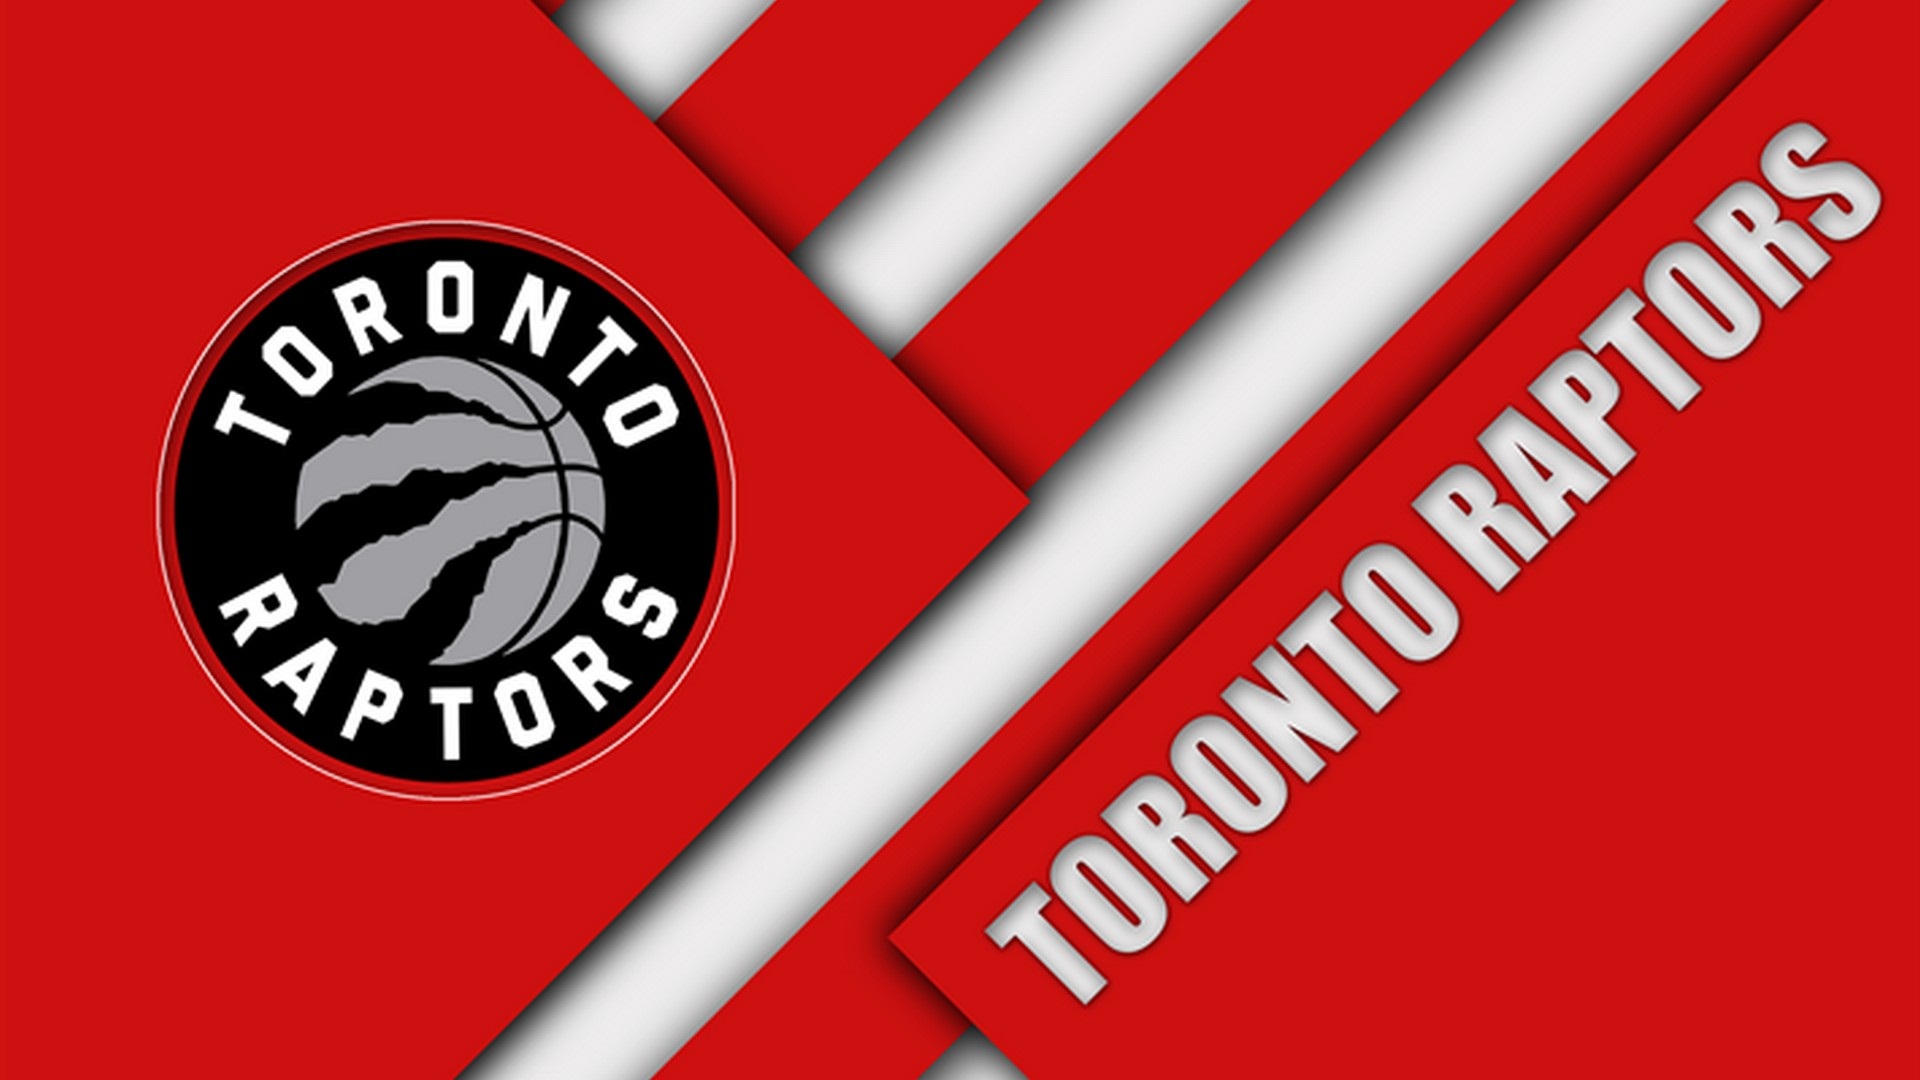 Windows Wallpaper Toronto Raptors with image dimensions 1920x1080 pixel. You can make this wallpaper for your Desktop Computer Backgrounds, Windows or Mac Screensavers, iPhone Lock screen, Tablet or Android and another Mobile Phone device